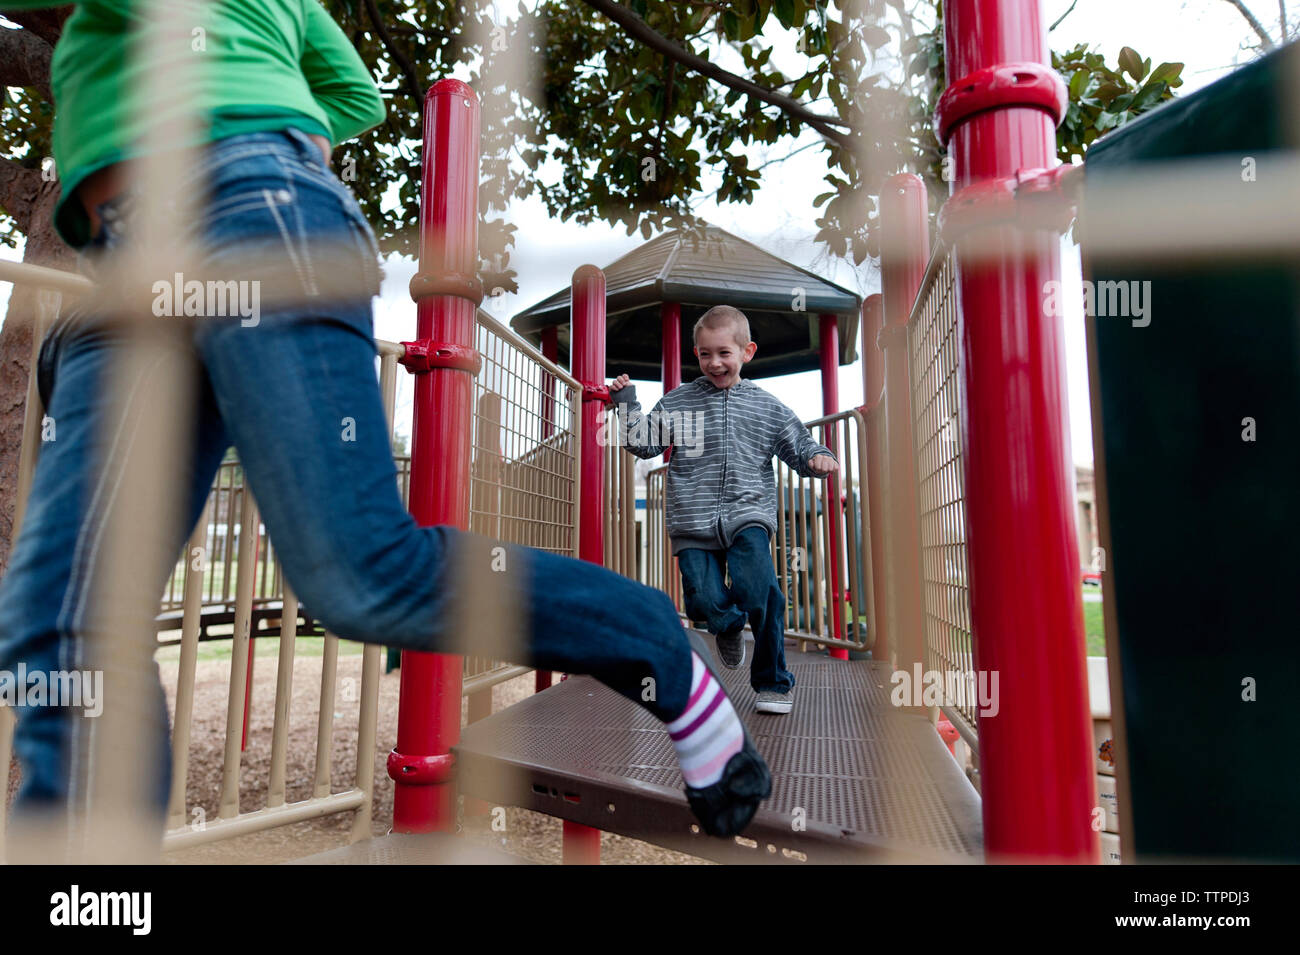 Siblings running on outdoor play equipment at playground Stock Photo